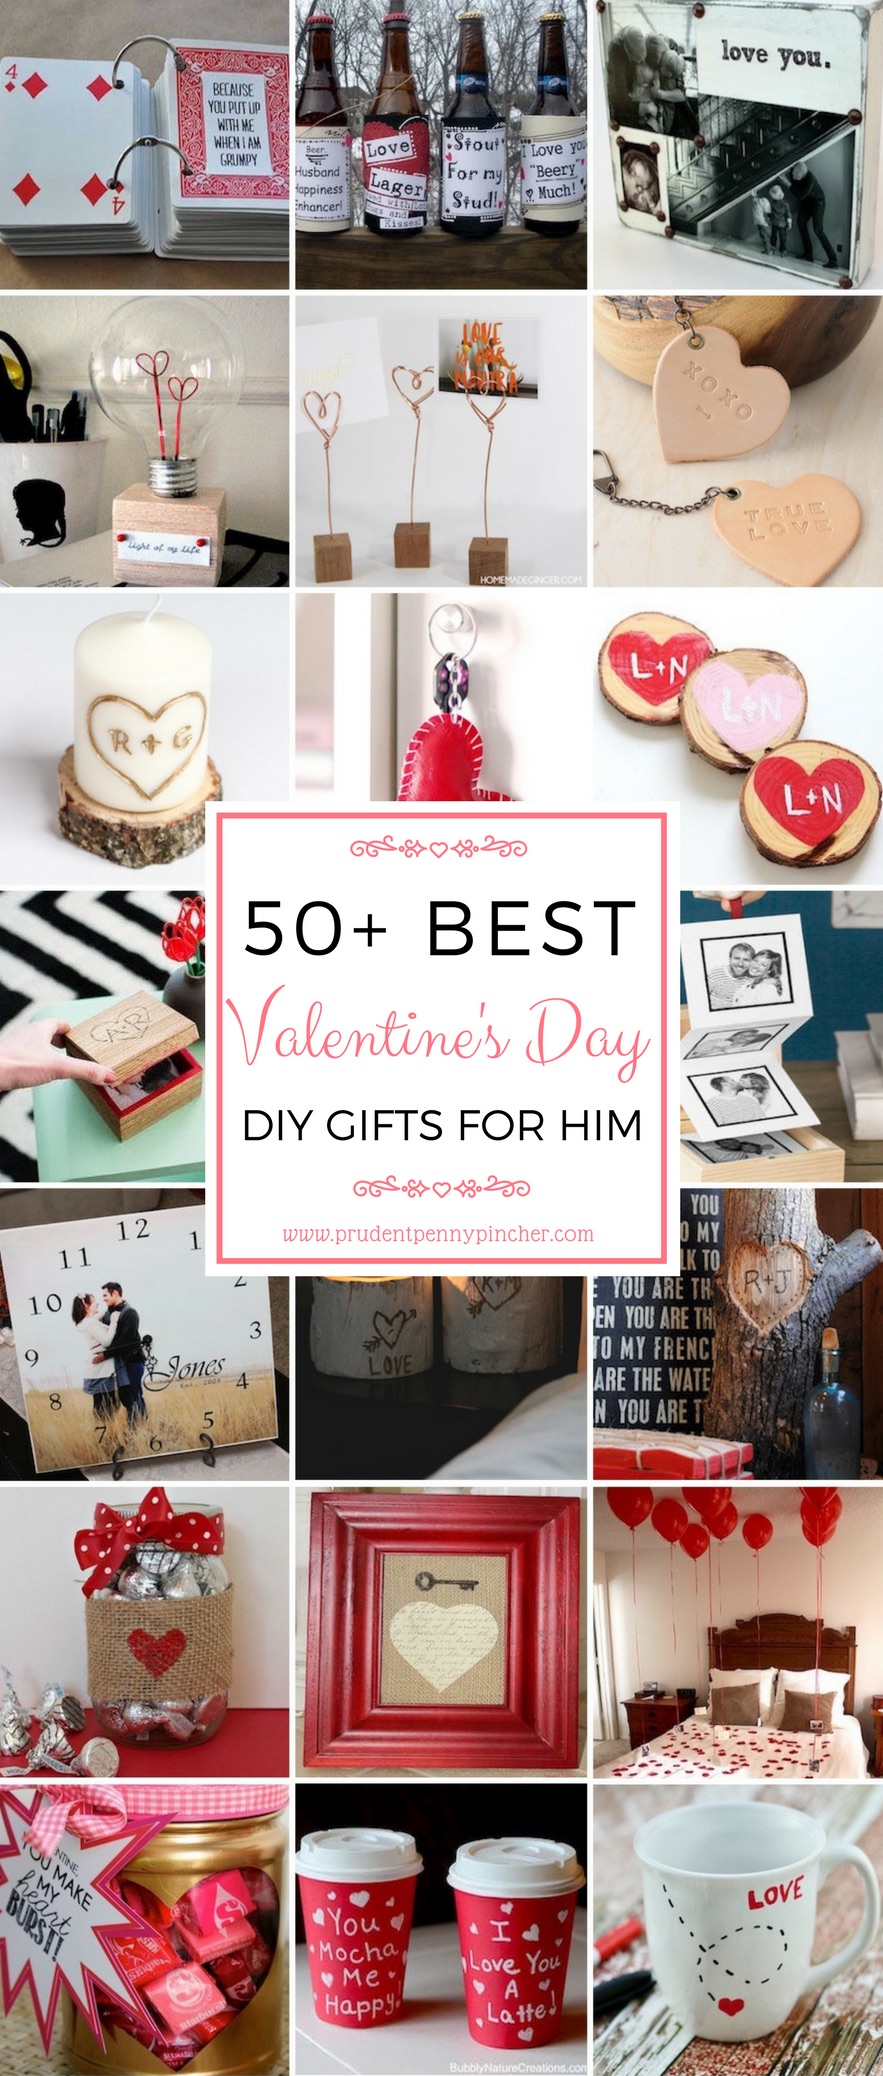 Valentines Gifts For Him Macy's / Creative Valentines Day Gifts For Him ...